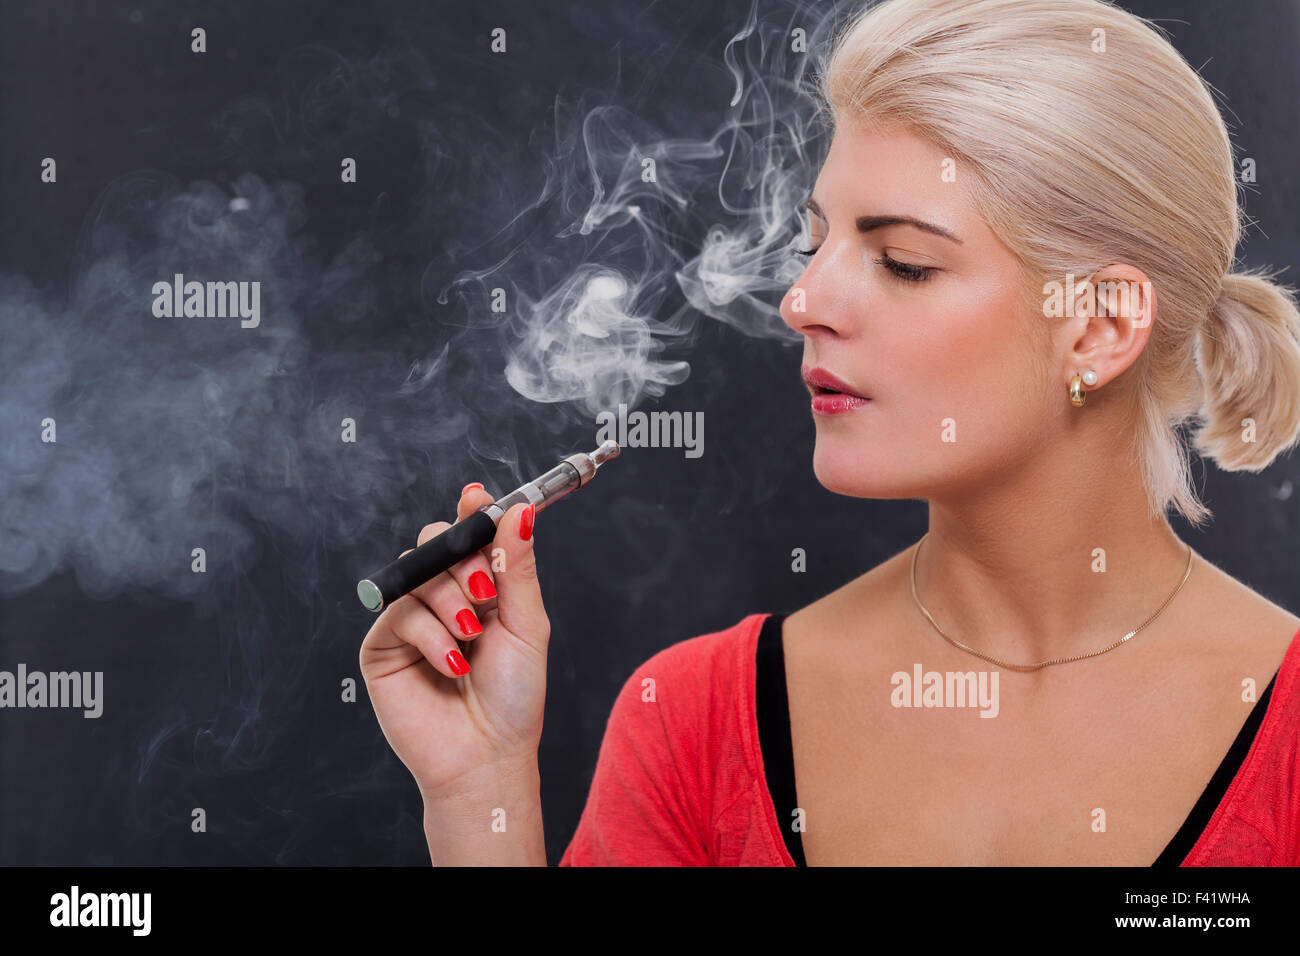 Stylish blond woman smoking an e-cigarette exhaling a cloud of smoke with her eyes closed in enjoyment, profile view on a dark background Stock Photo